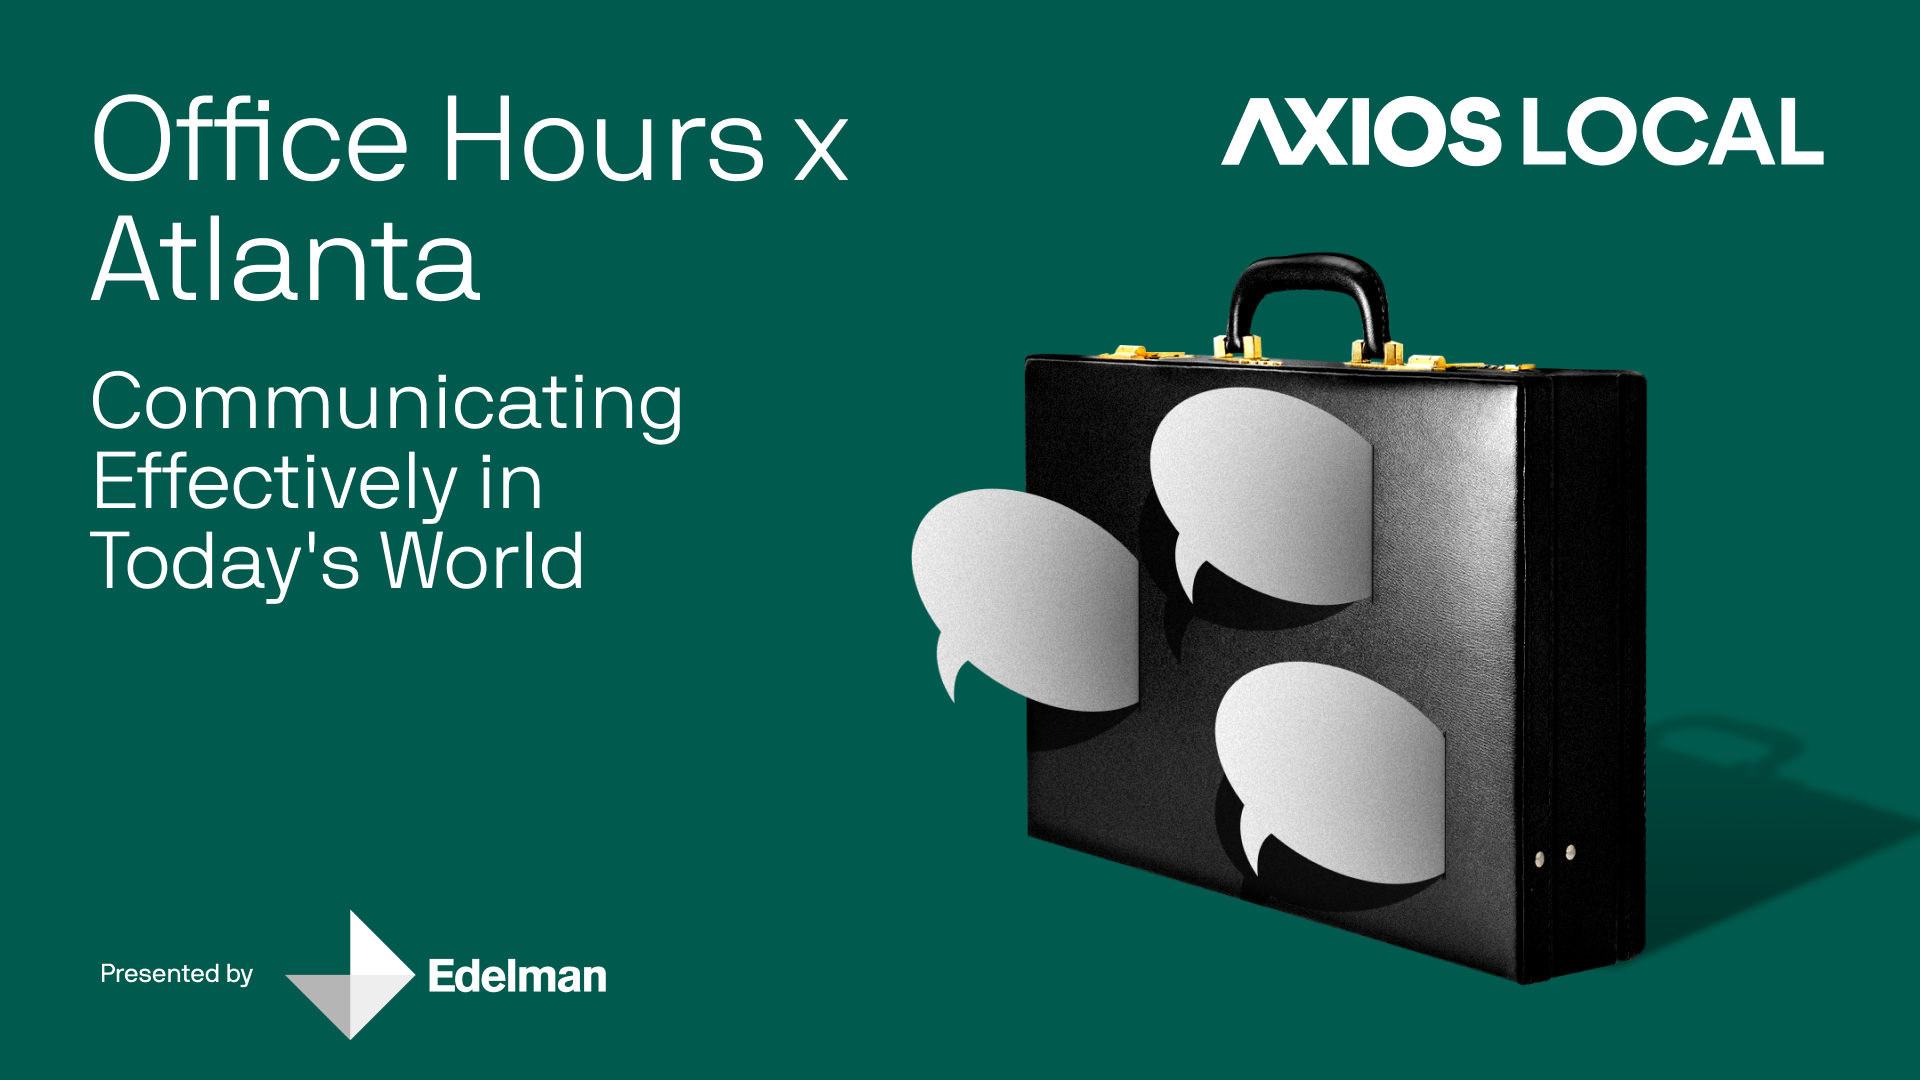 Axios Local Office Hours x Atlanta: Communicating Effectively in Today's World